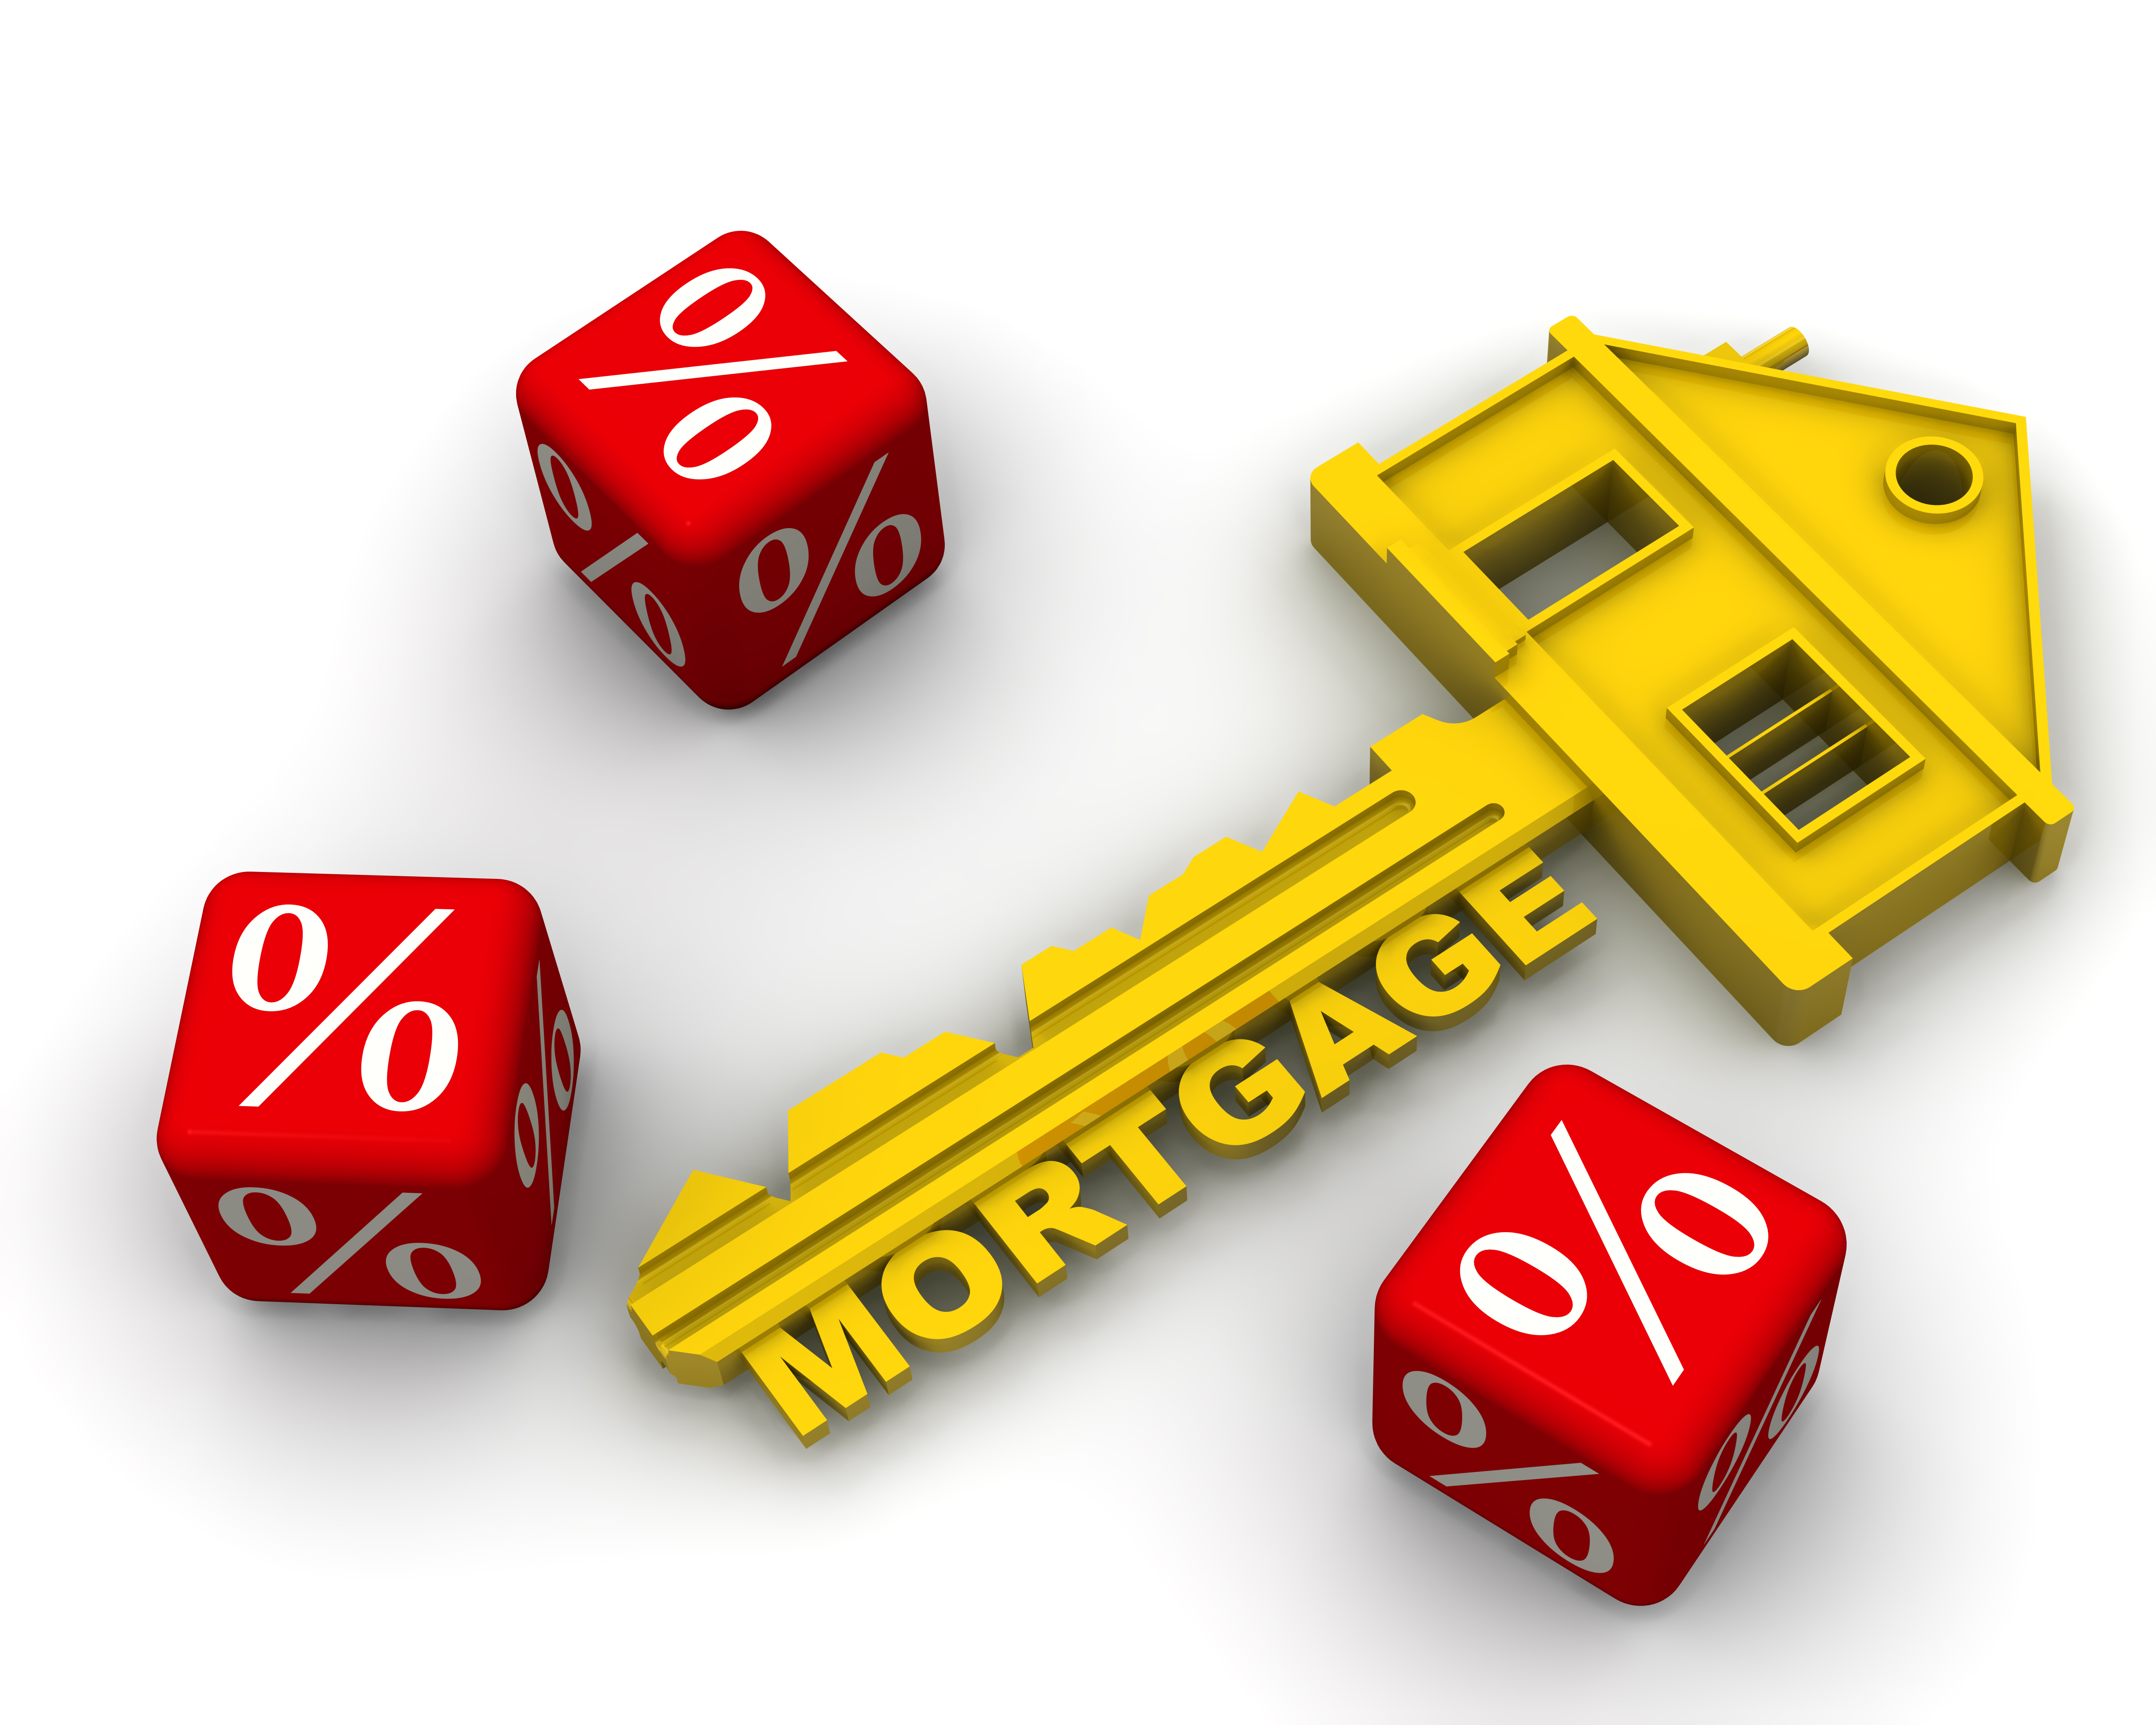 E Mortgage Capital Can Help You Get Approved For The Right Mortgage In Westminster Call 855-569-3700